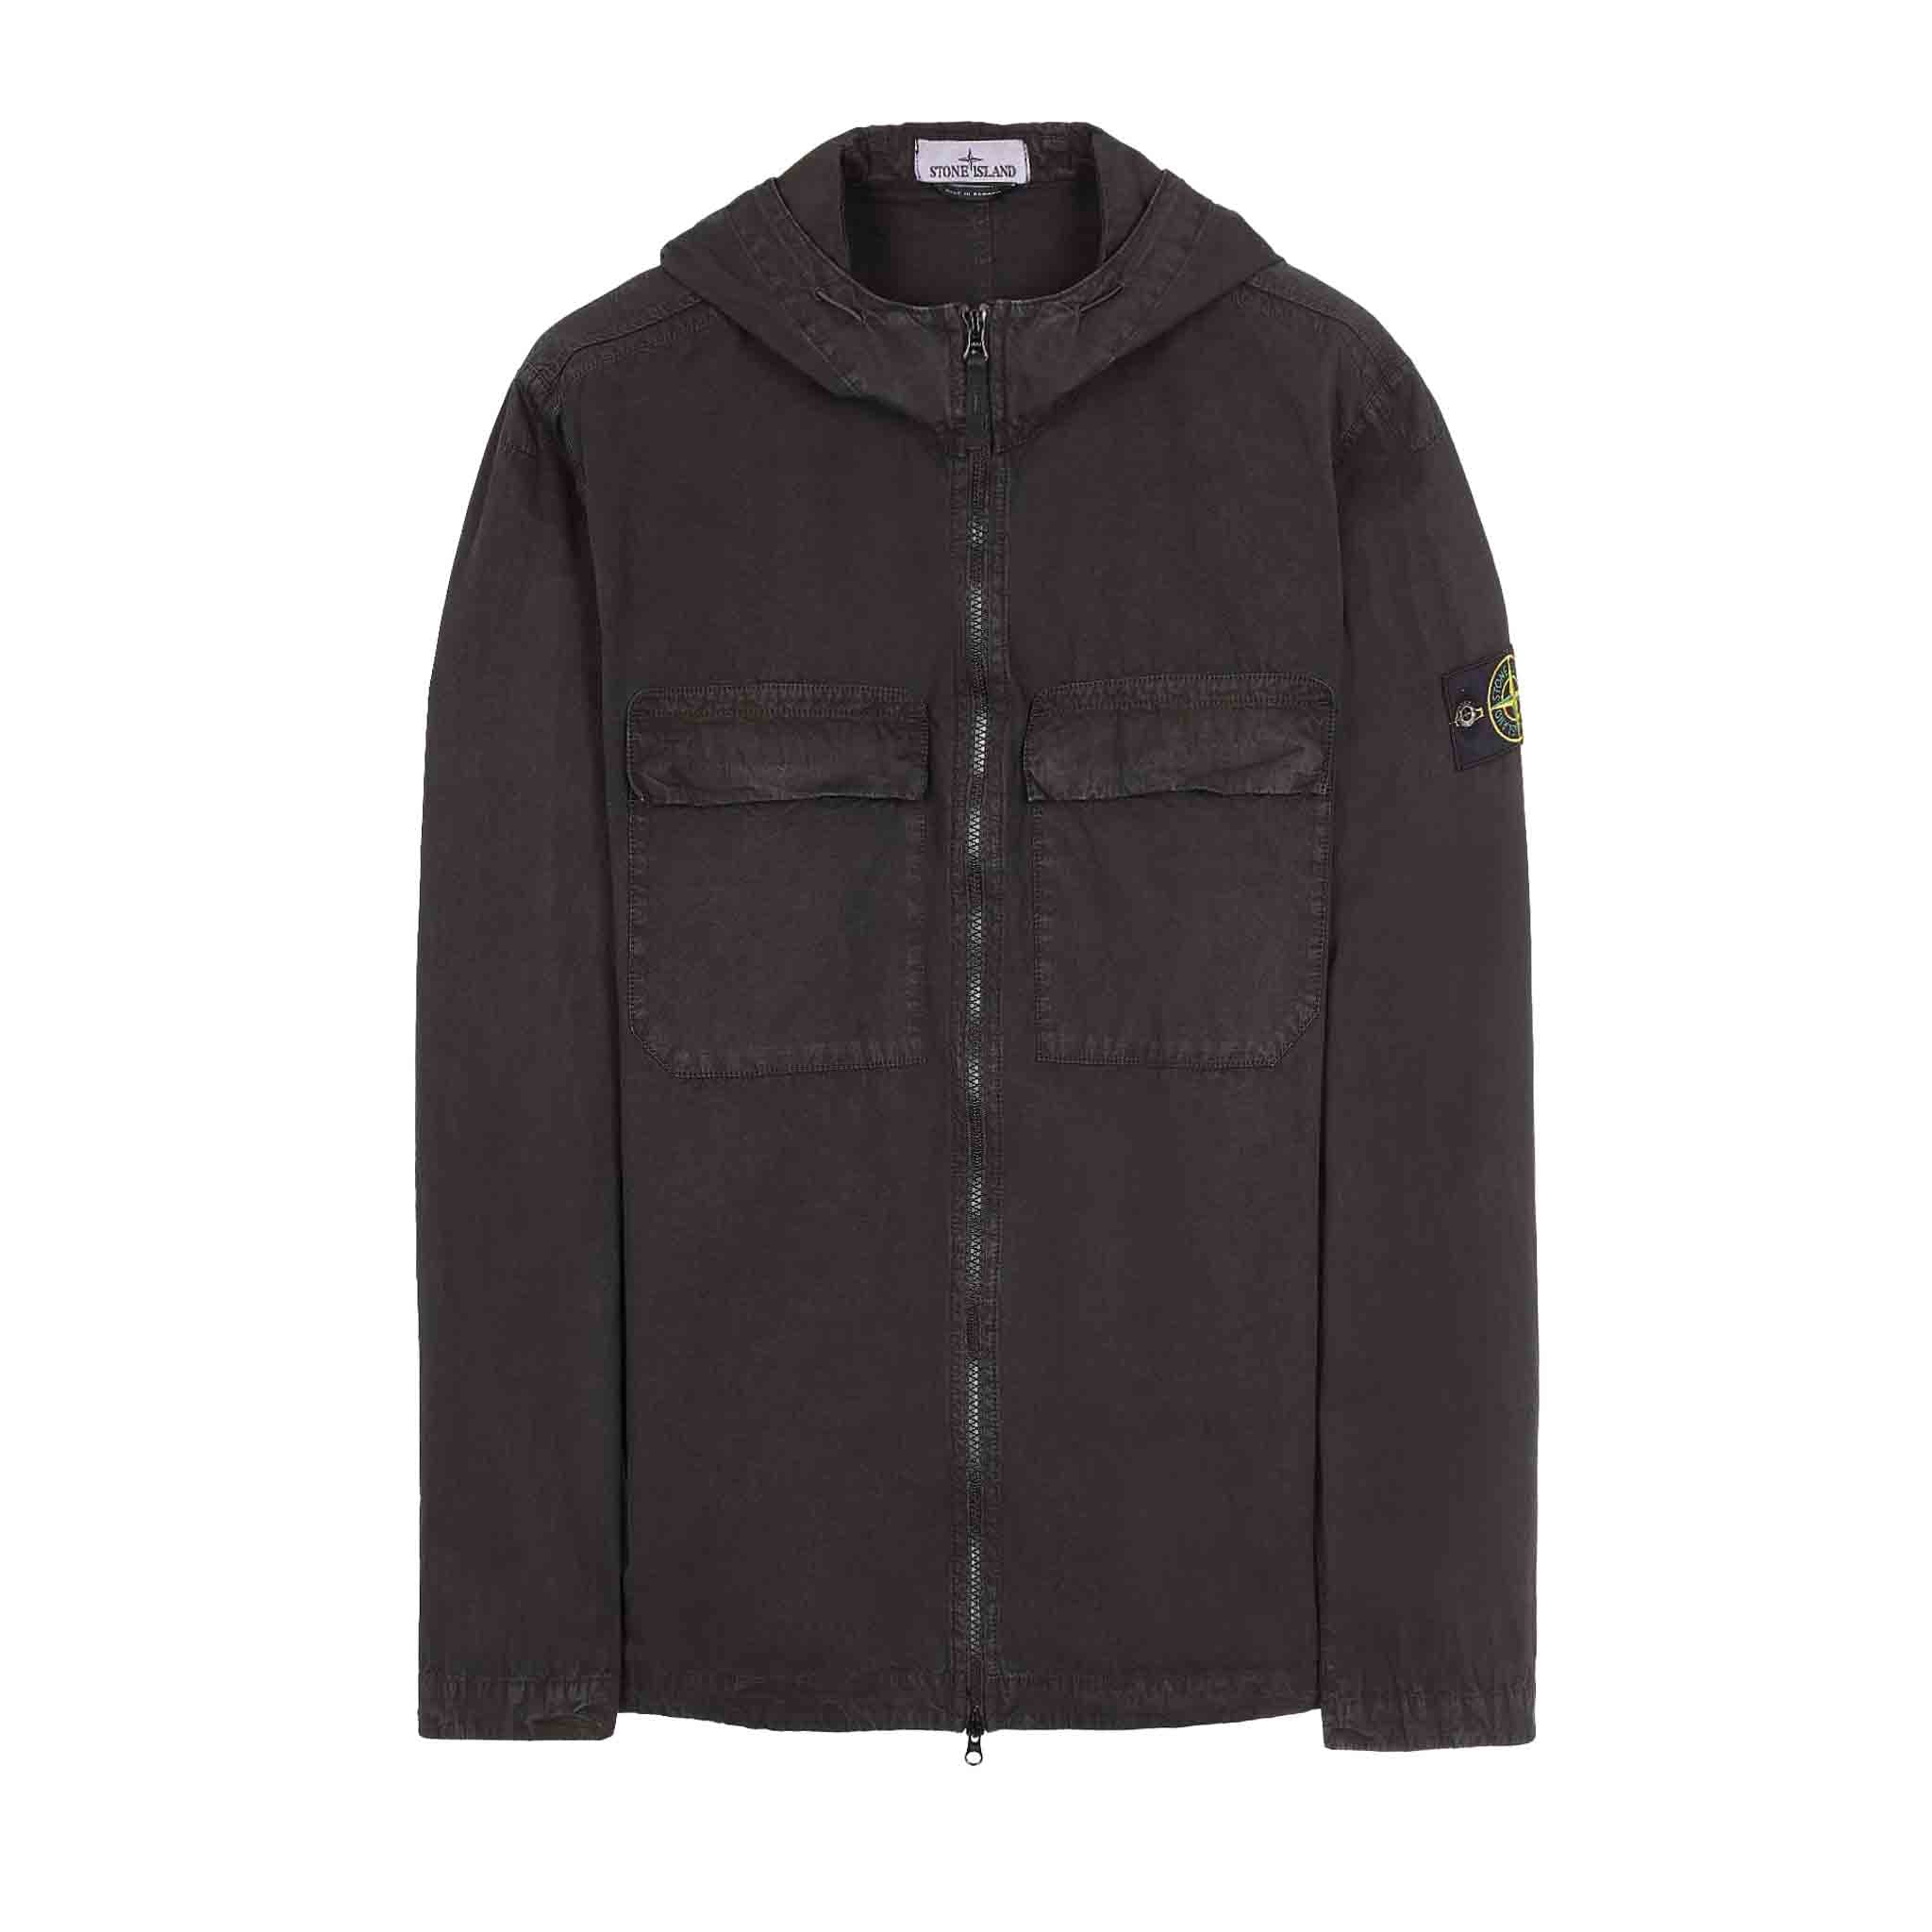 Stone Island 'Old Treatment' Regular Fit Hooded Overshirt in Black